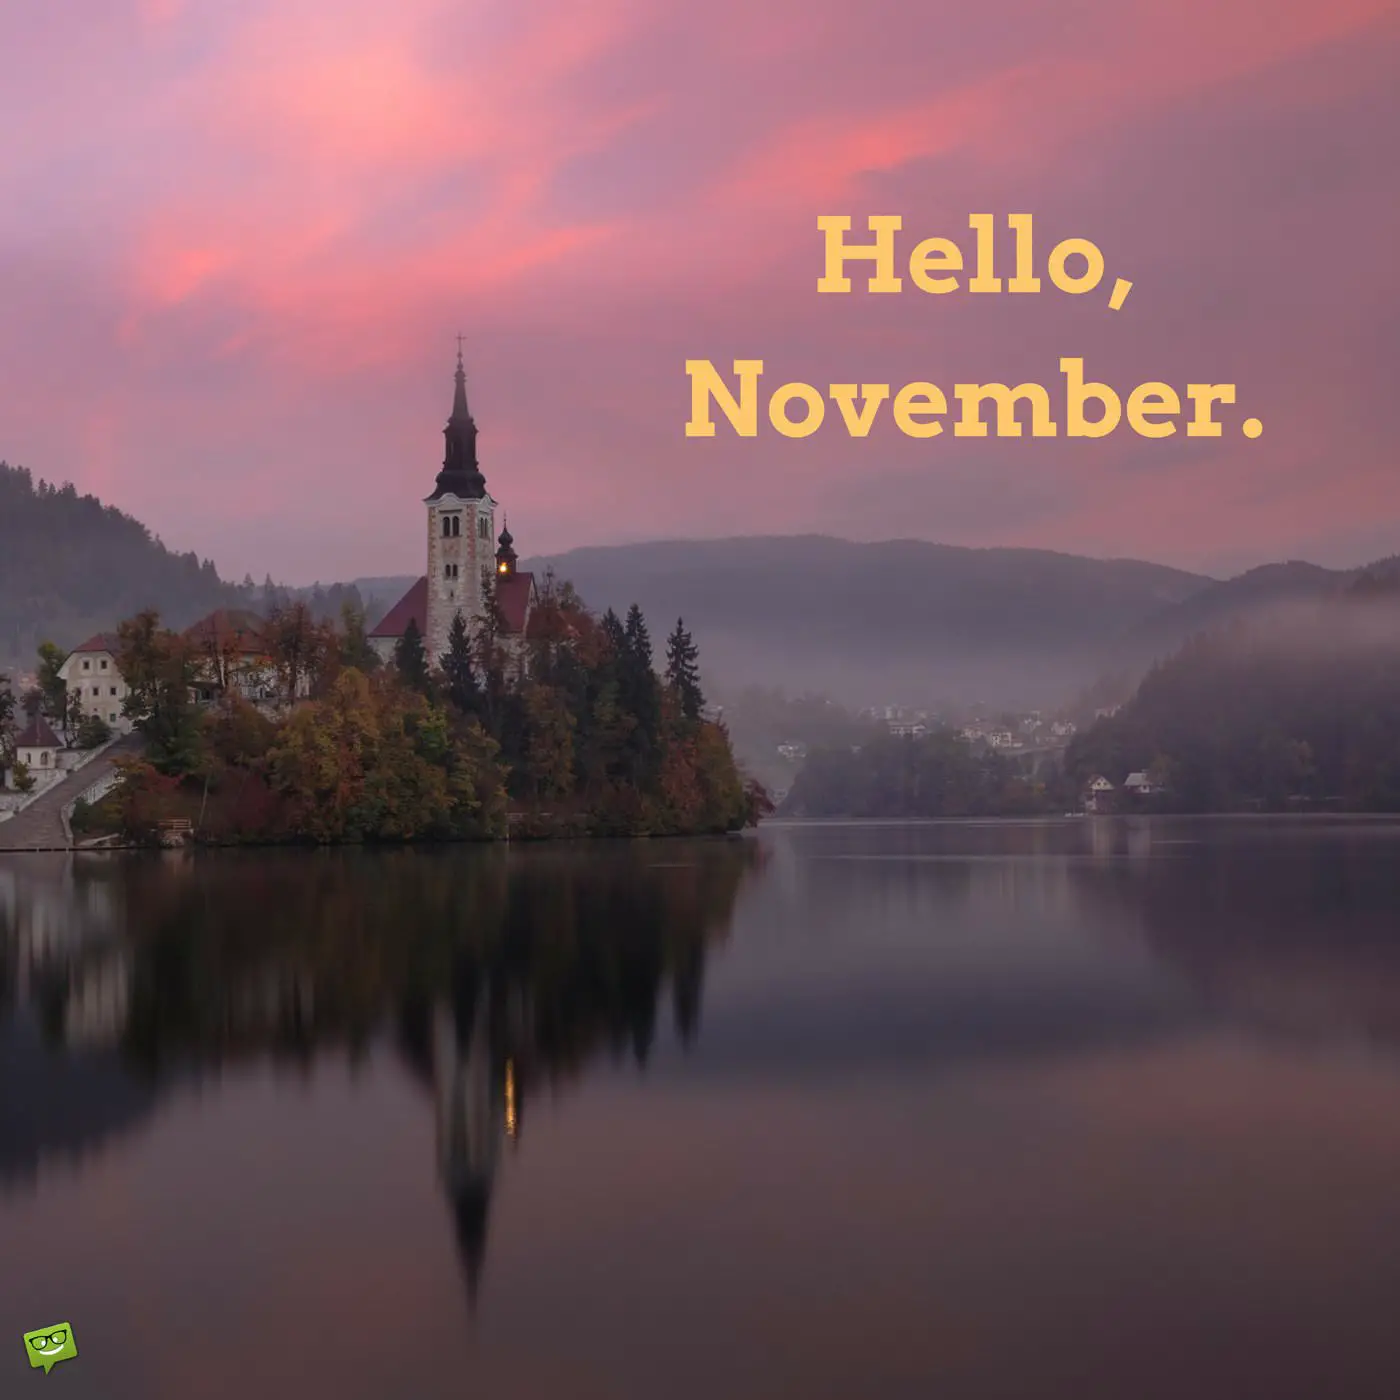 Hello, November!  Quotes for the Month of Gratitude